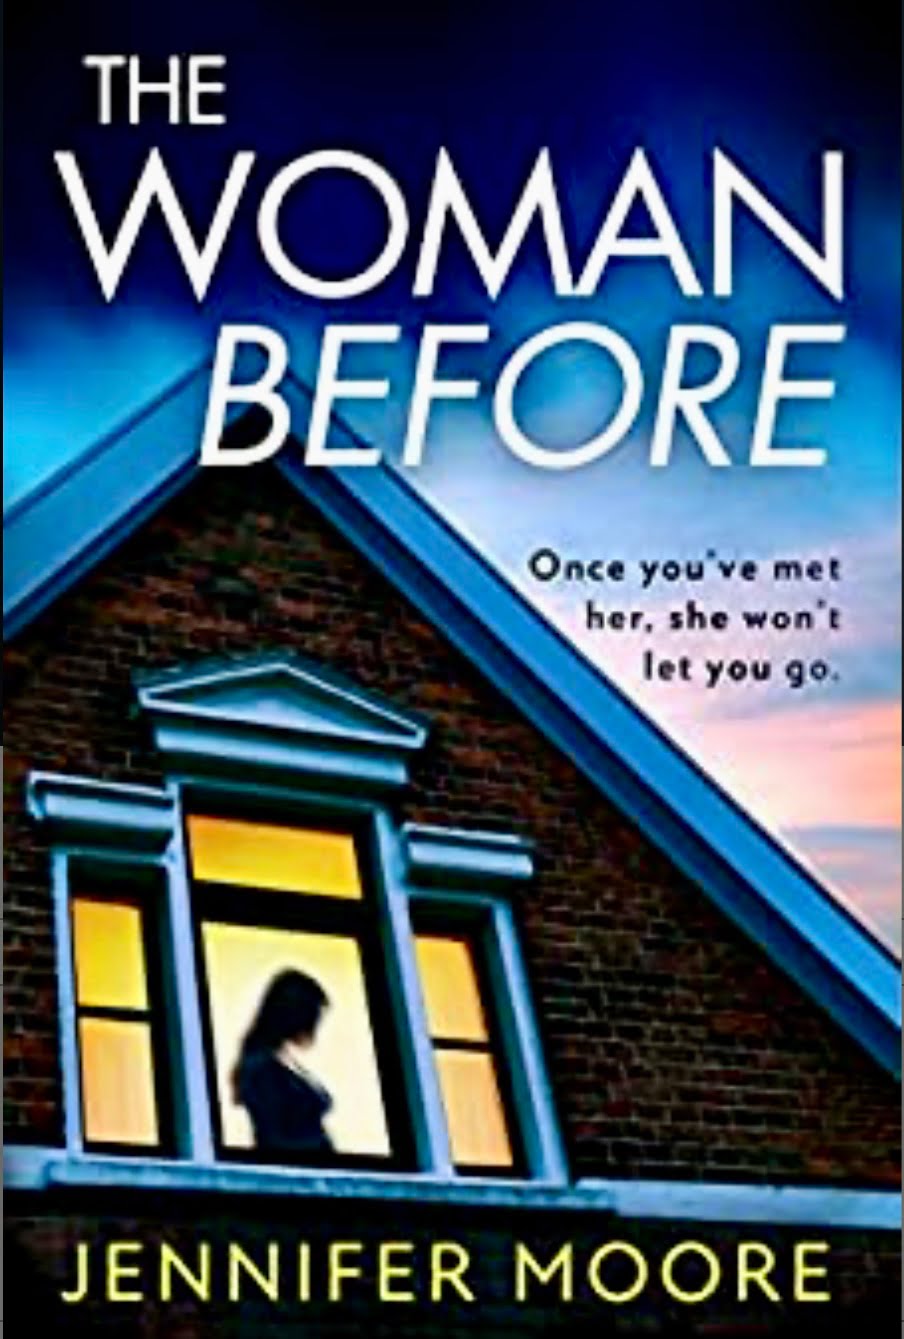 THE WOMAN BEFORE BY JENNIFER MOORE – BOOK REVIEW